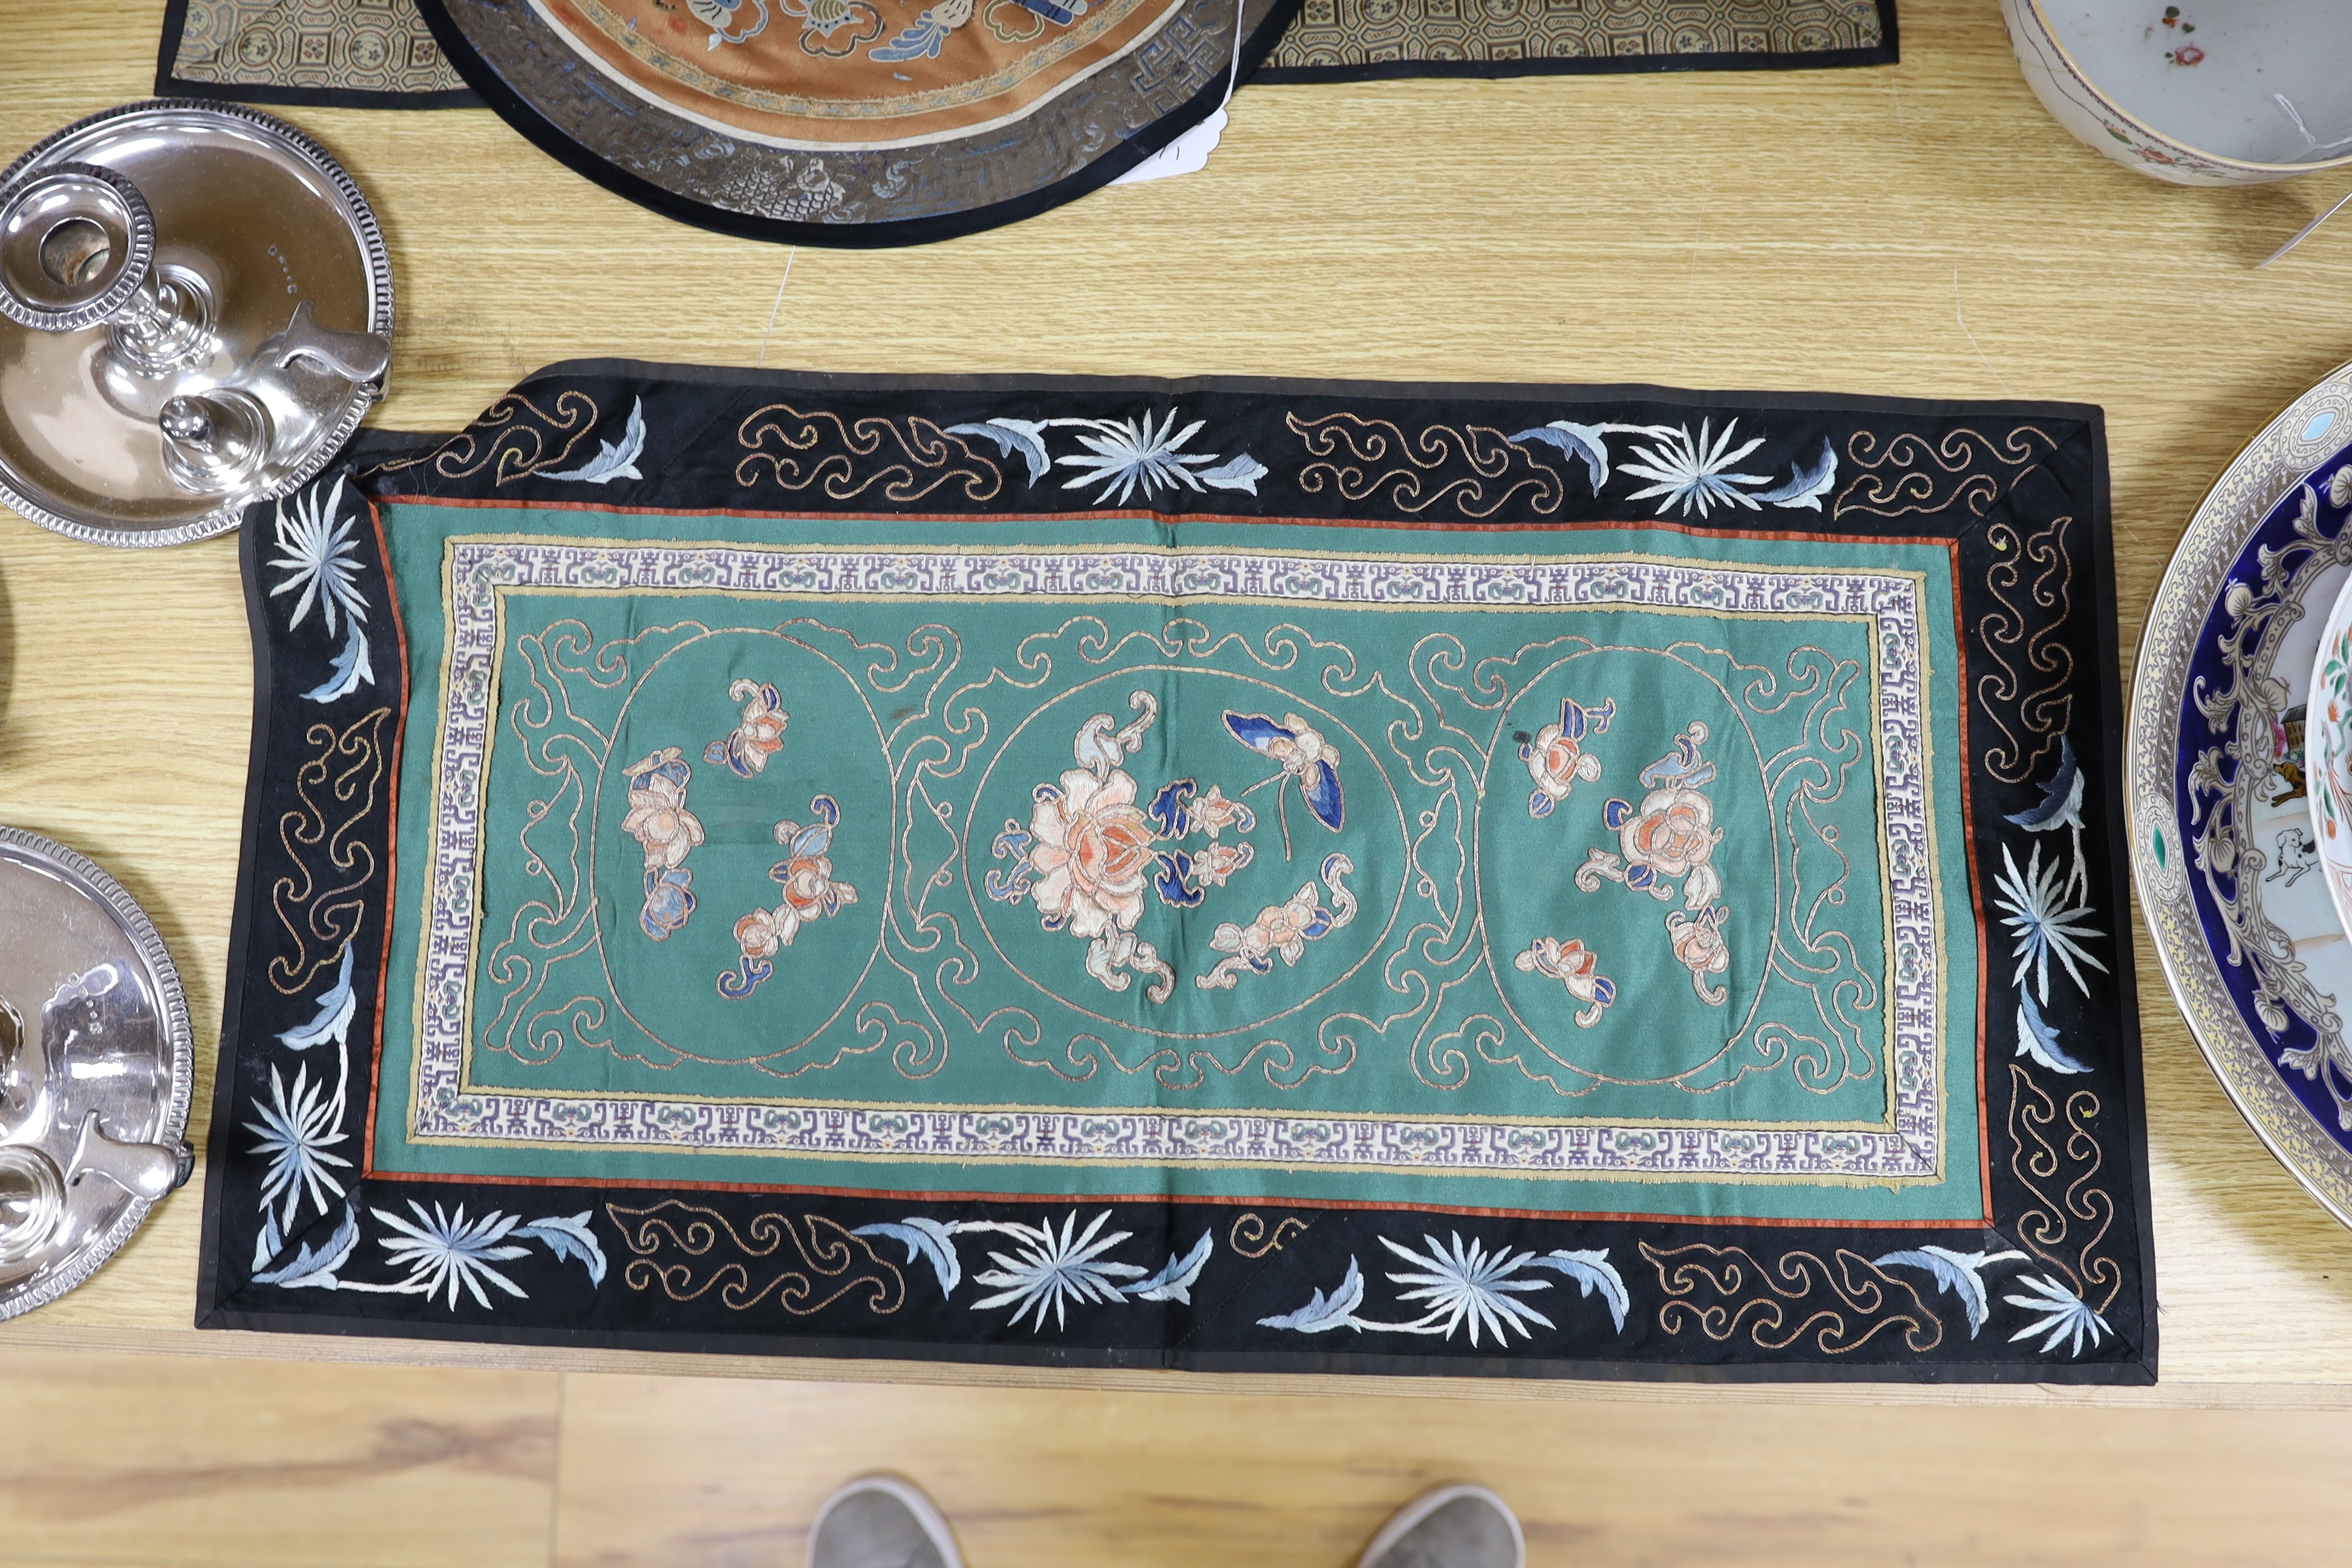 Three Chinese embroidered panels, one embroidered with Chinese knot